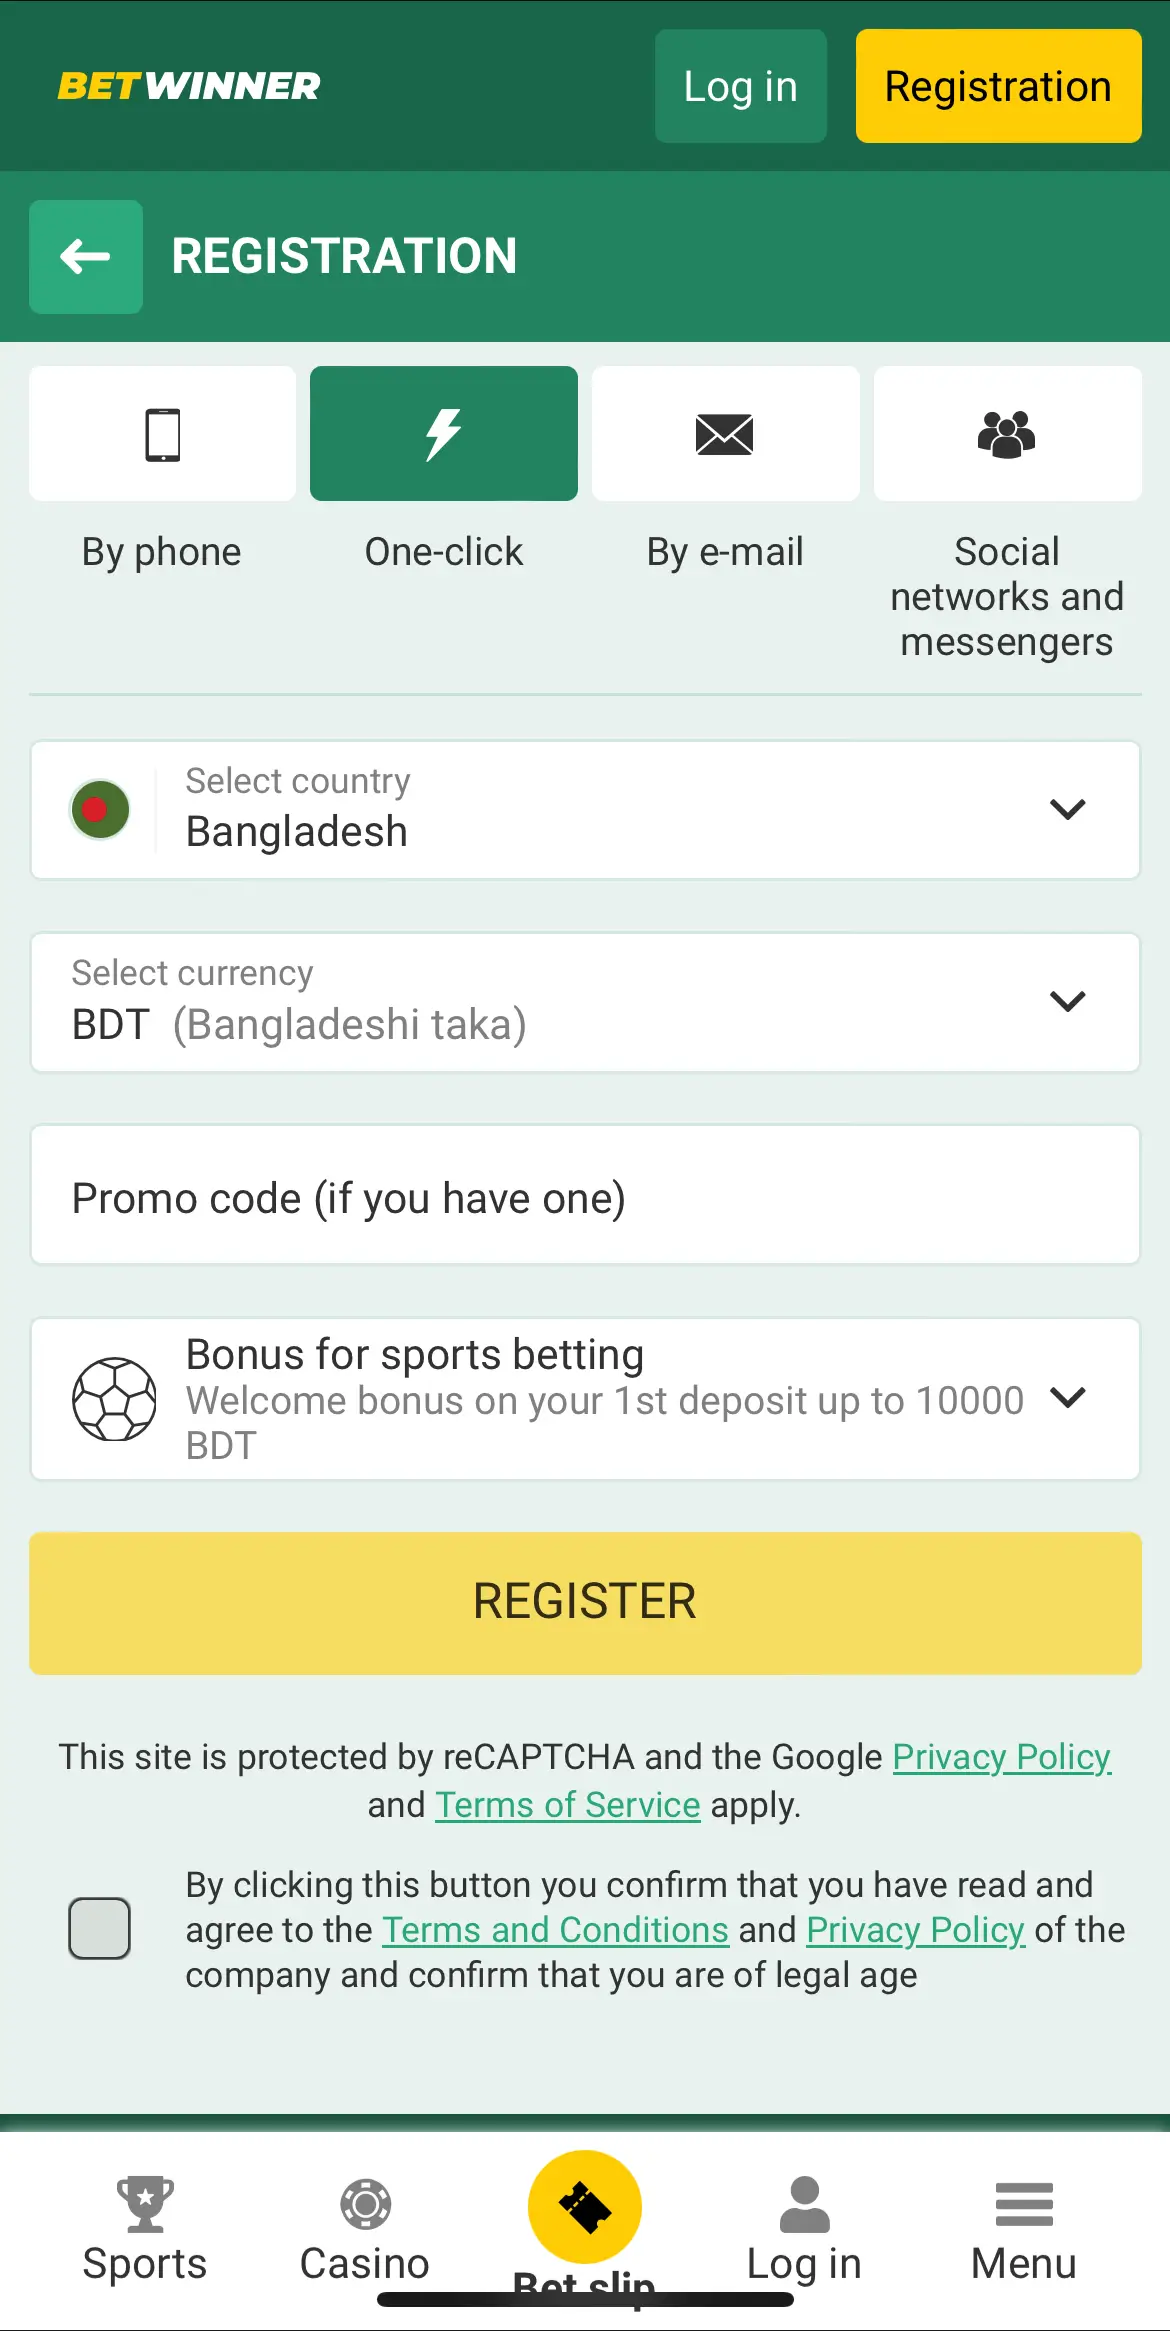 registration at Betwinner BD by phone